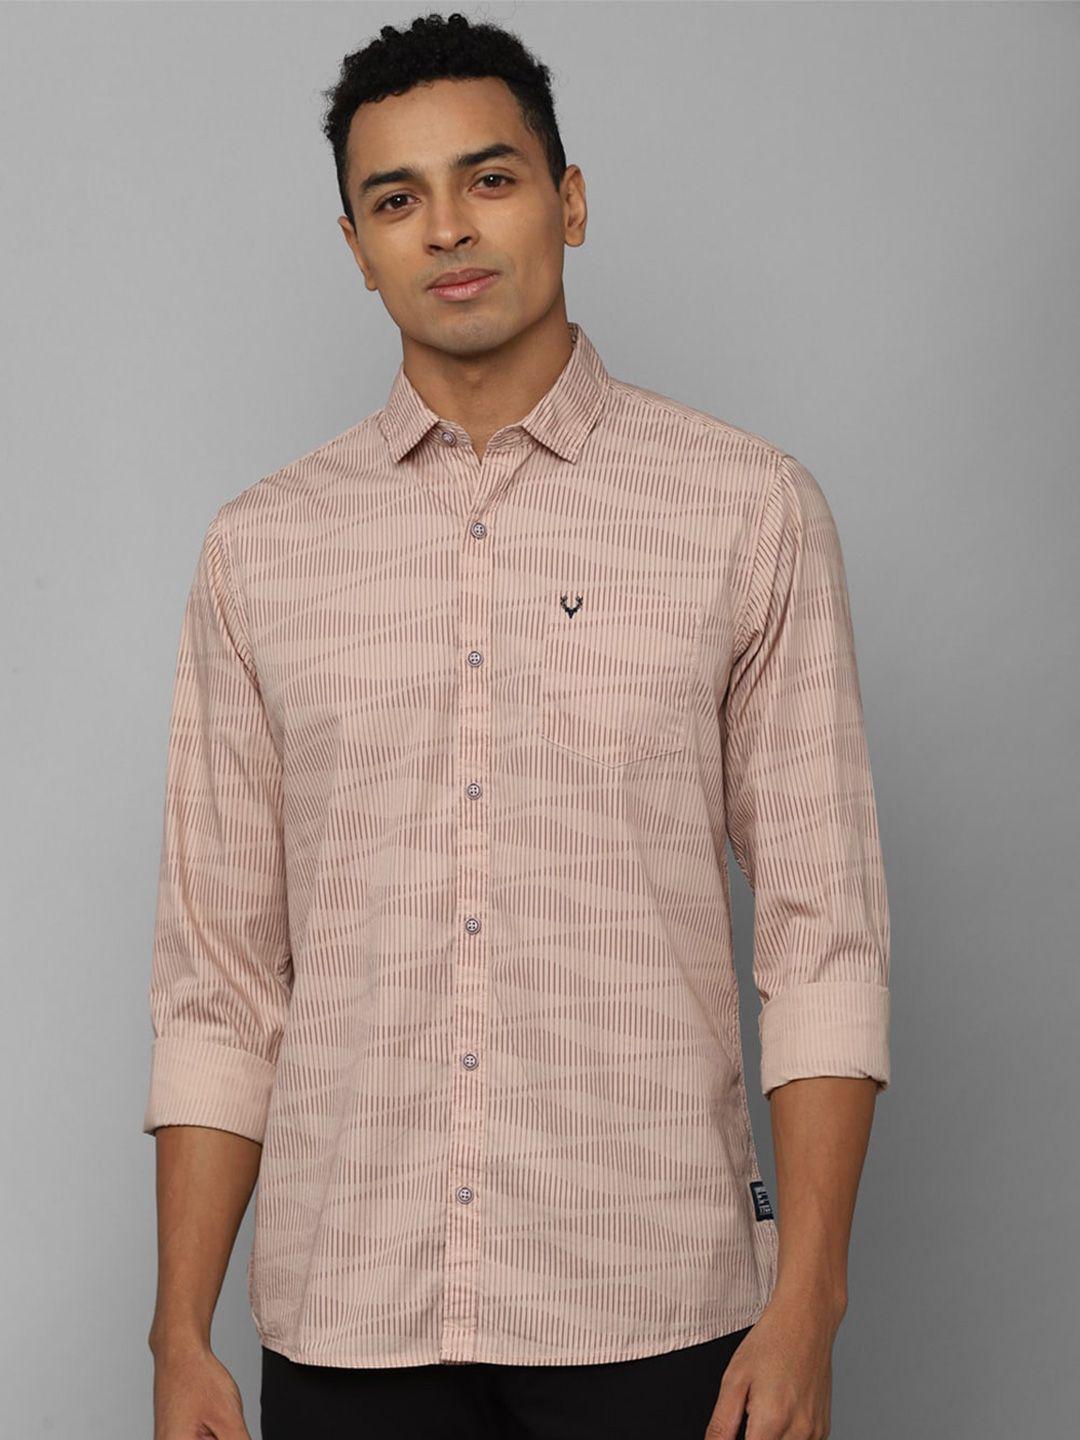 allen solly sport regular fit abstract printed pure cotton casual shirt